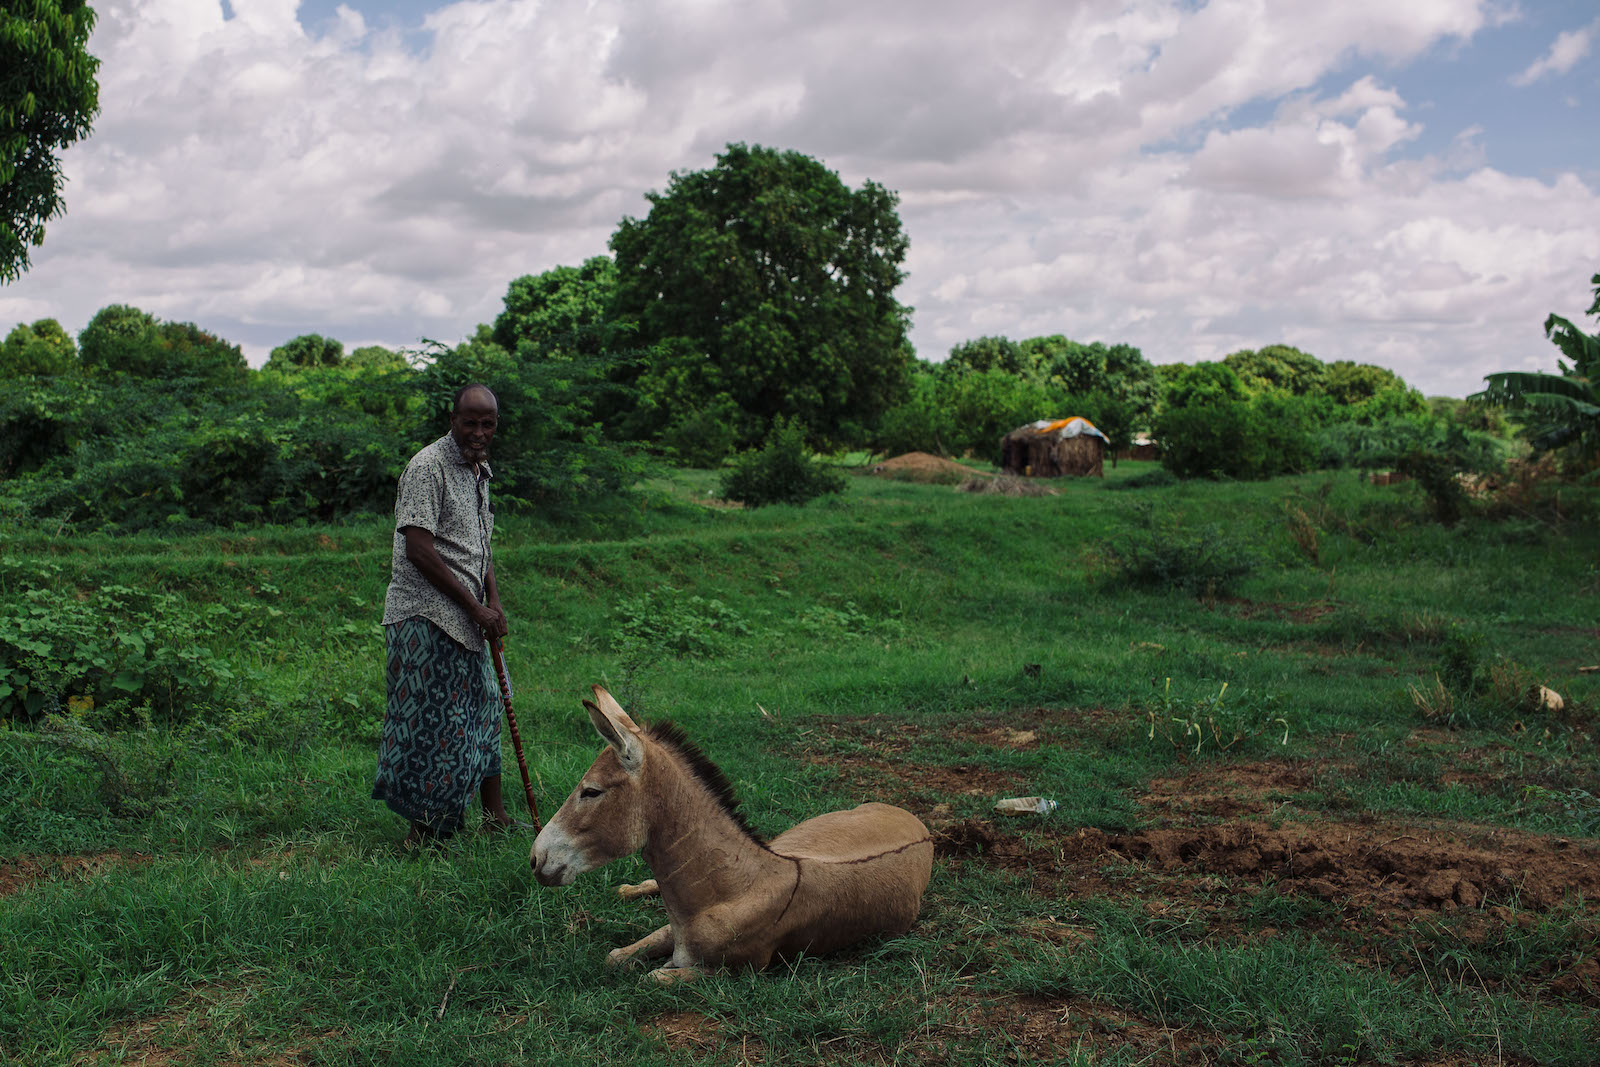 A man stands near a donkey in a green field